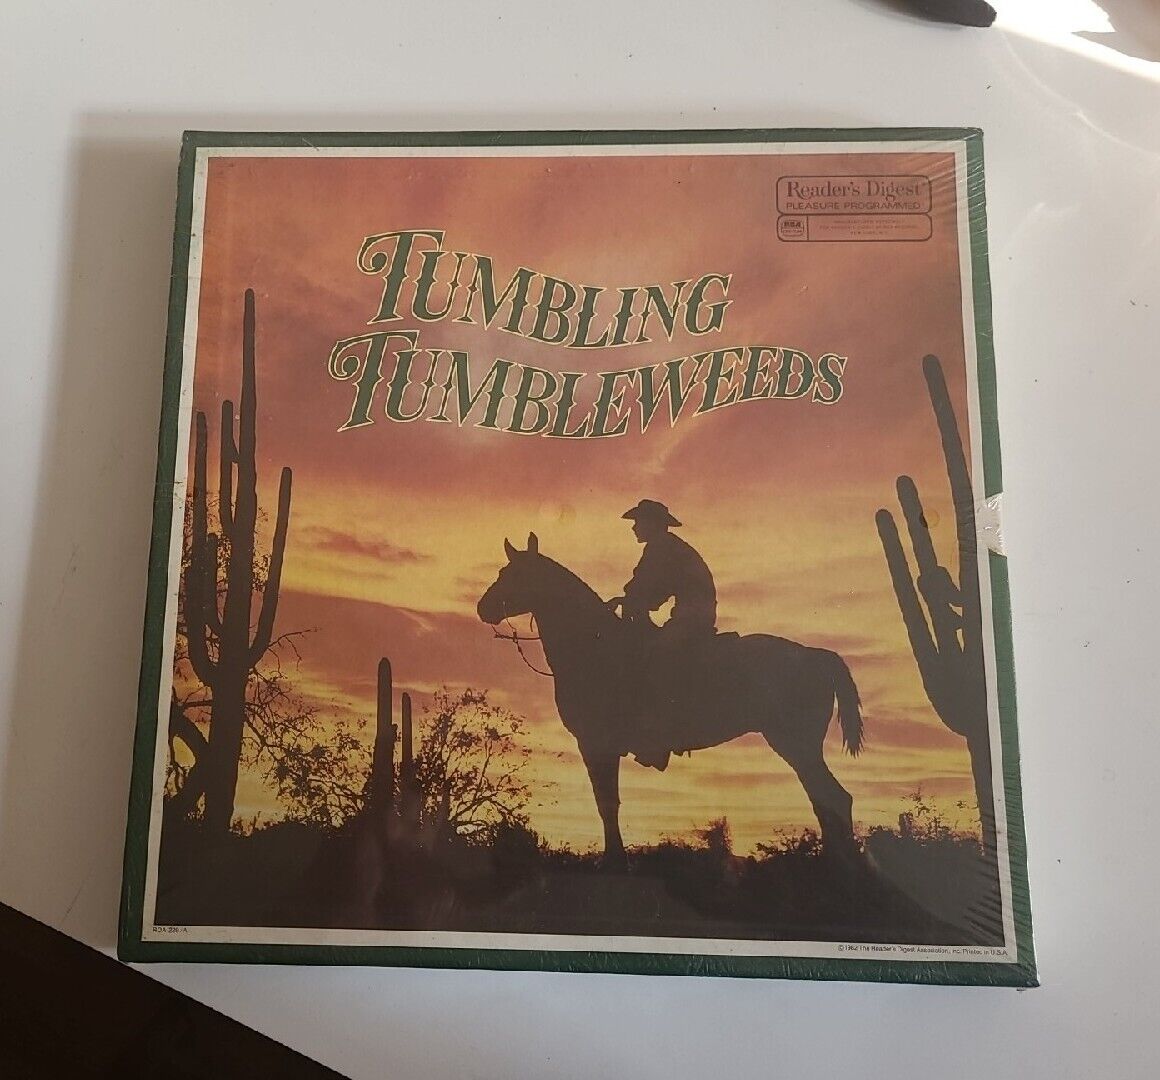 Tumbling Tumbleweeds 7 Disc LP Set Classic Country Western Readers Digest Sealed